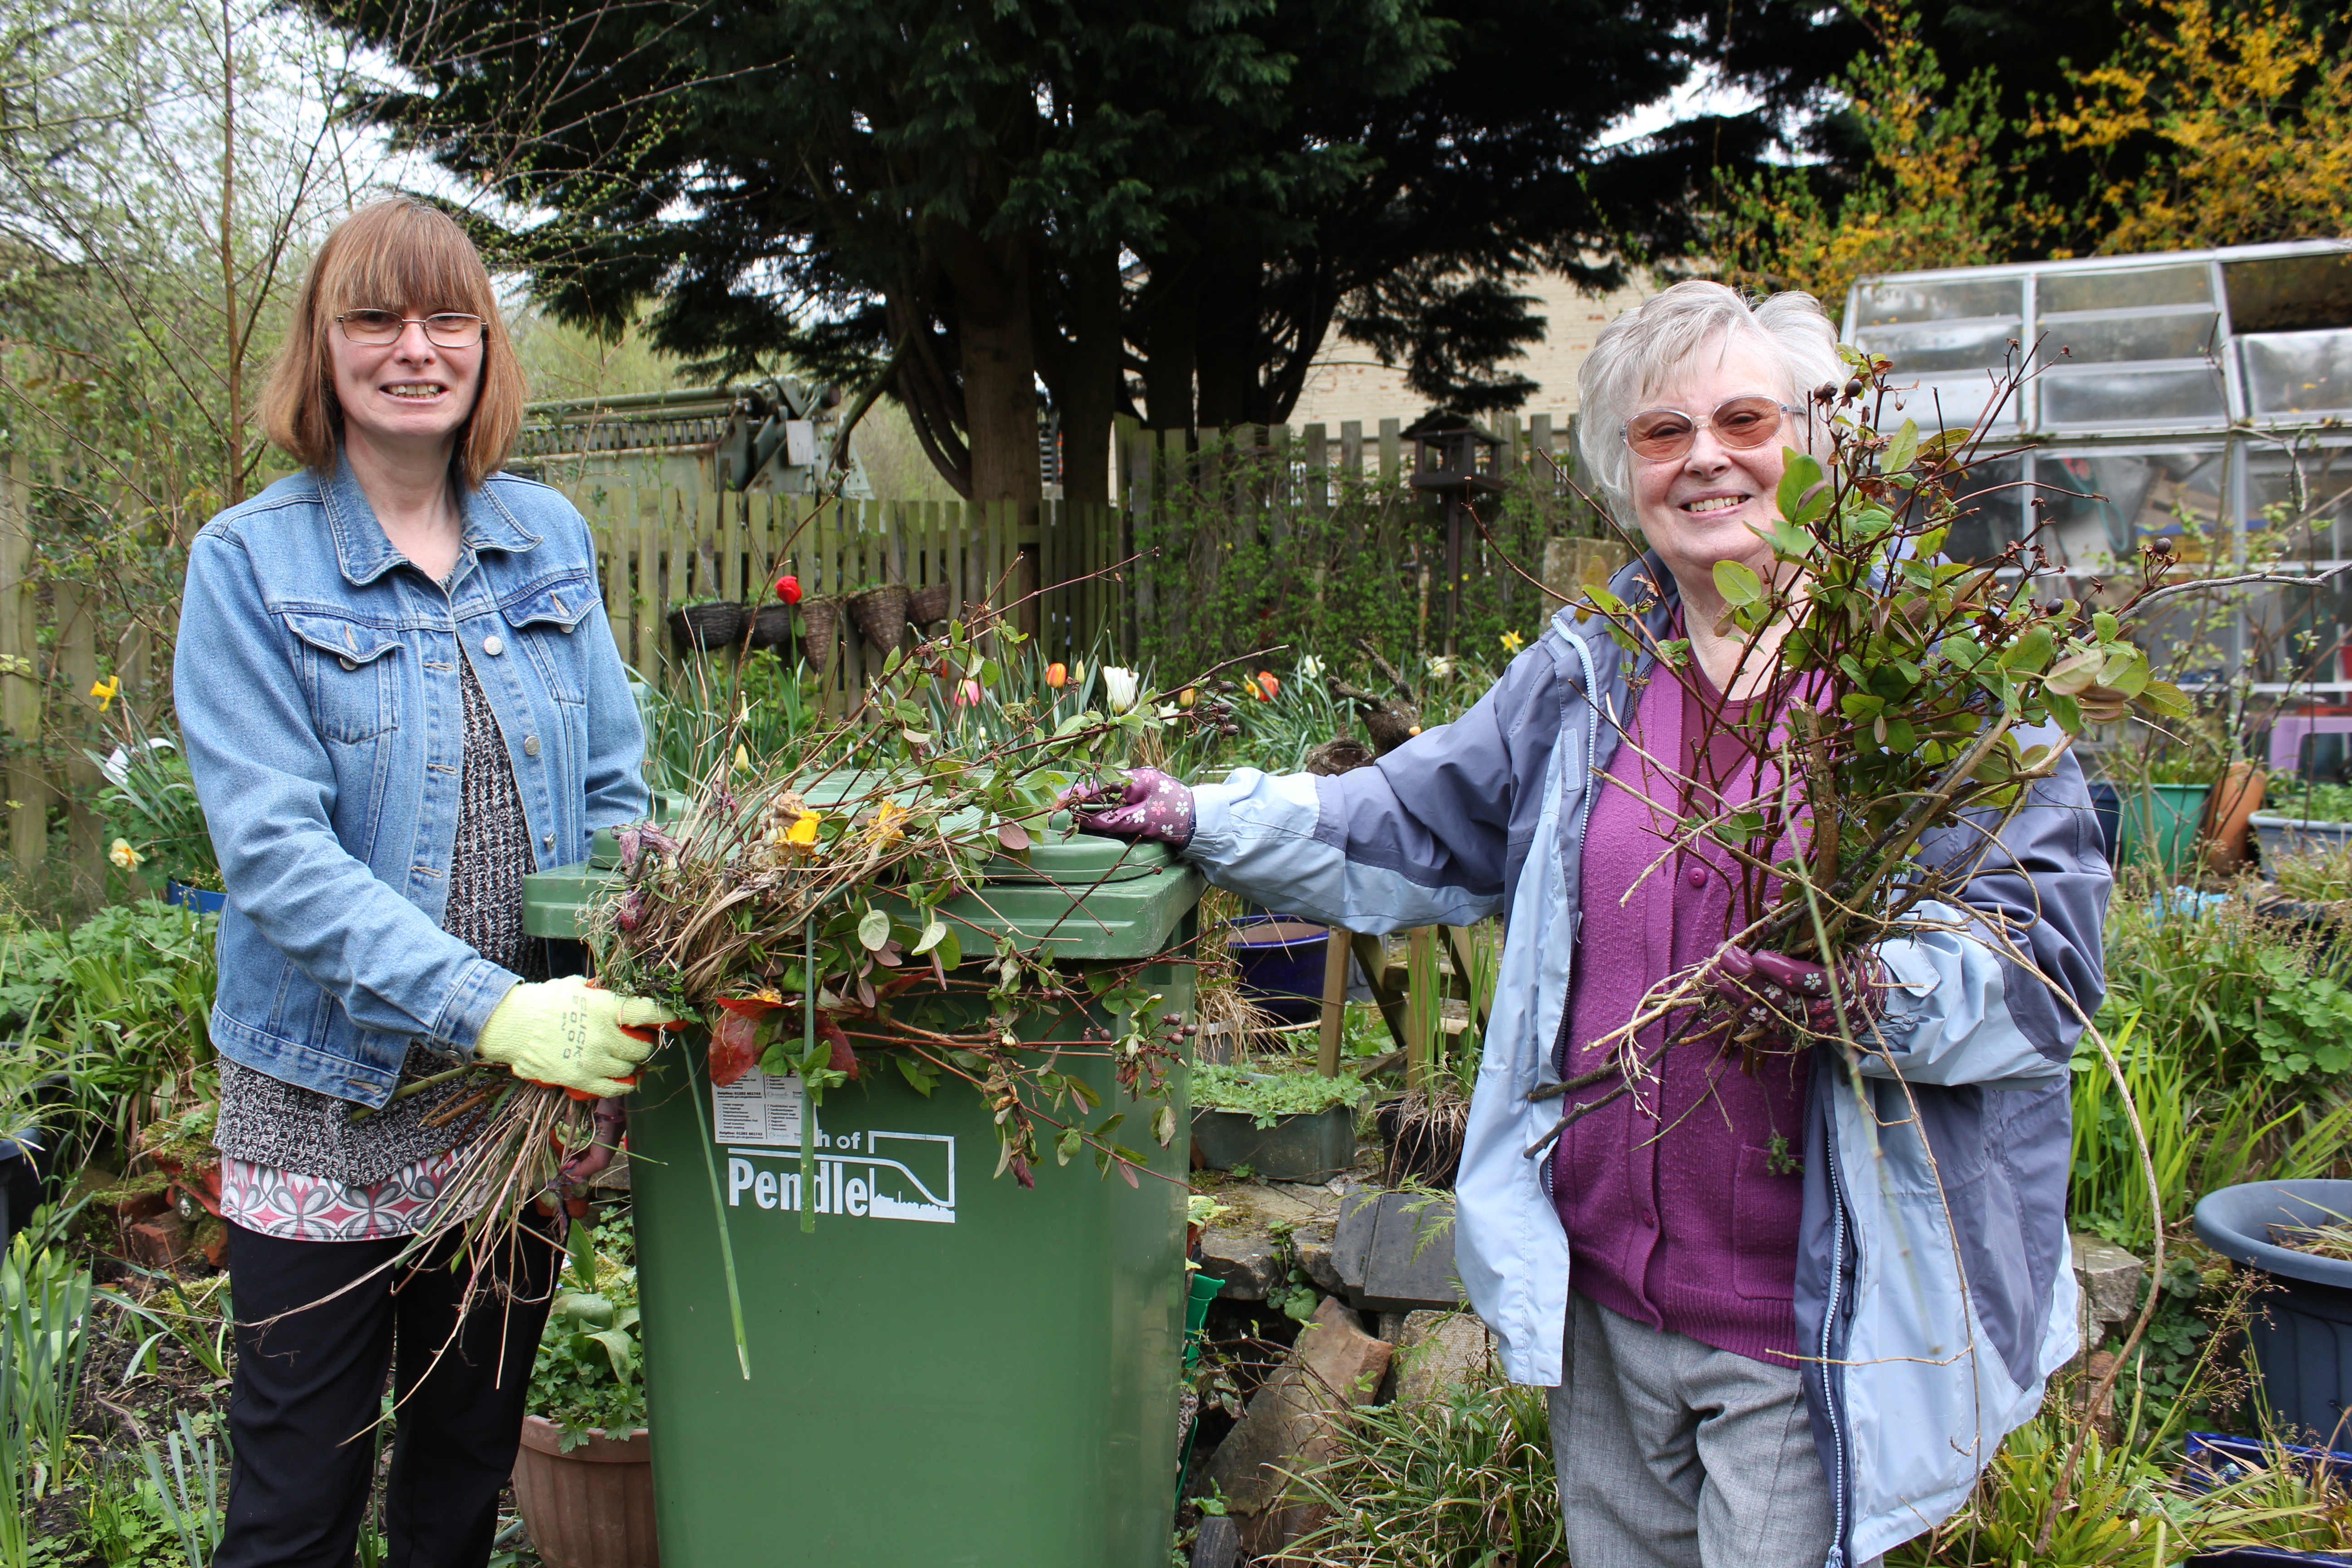 Photograph of garden waste recyclers.